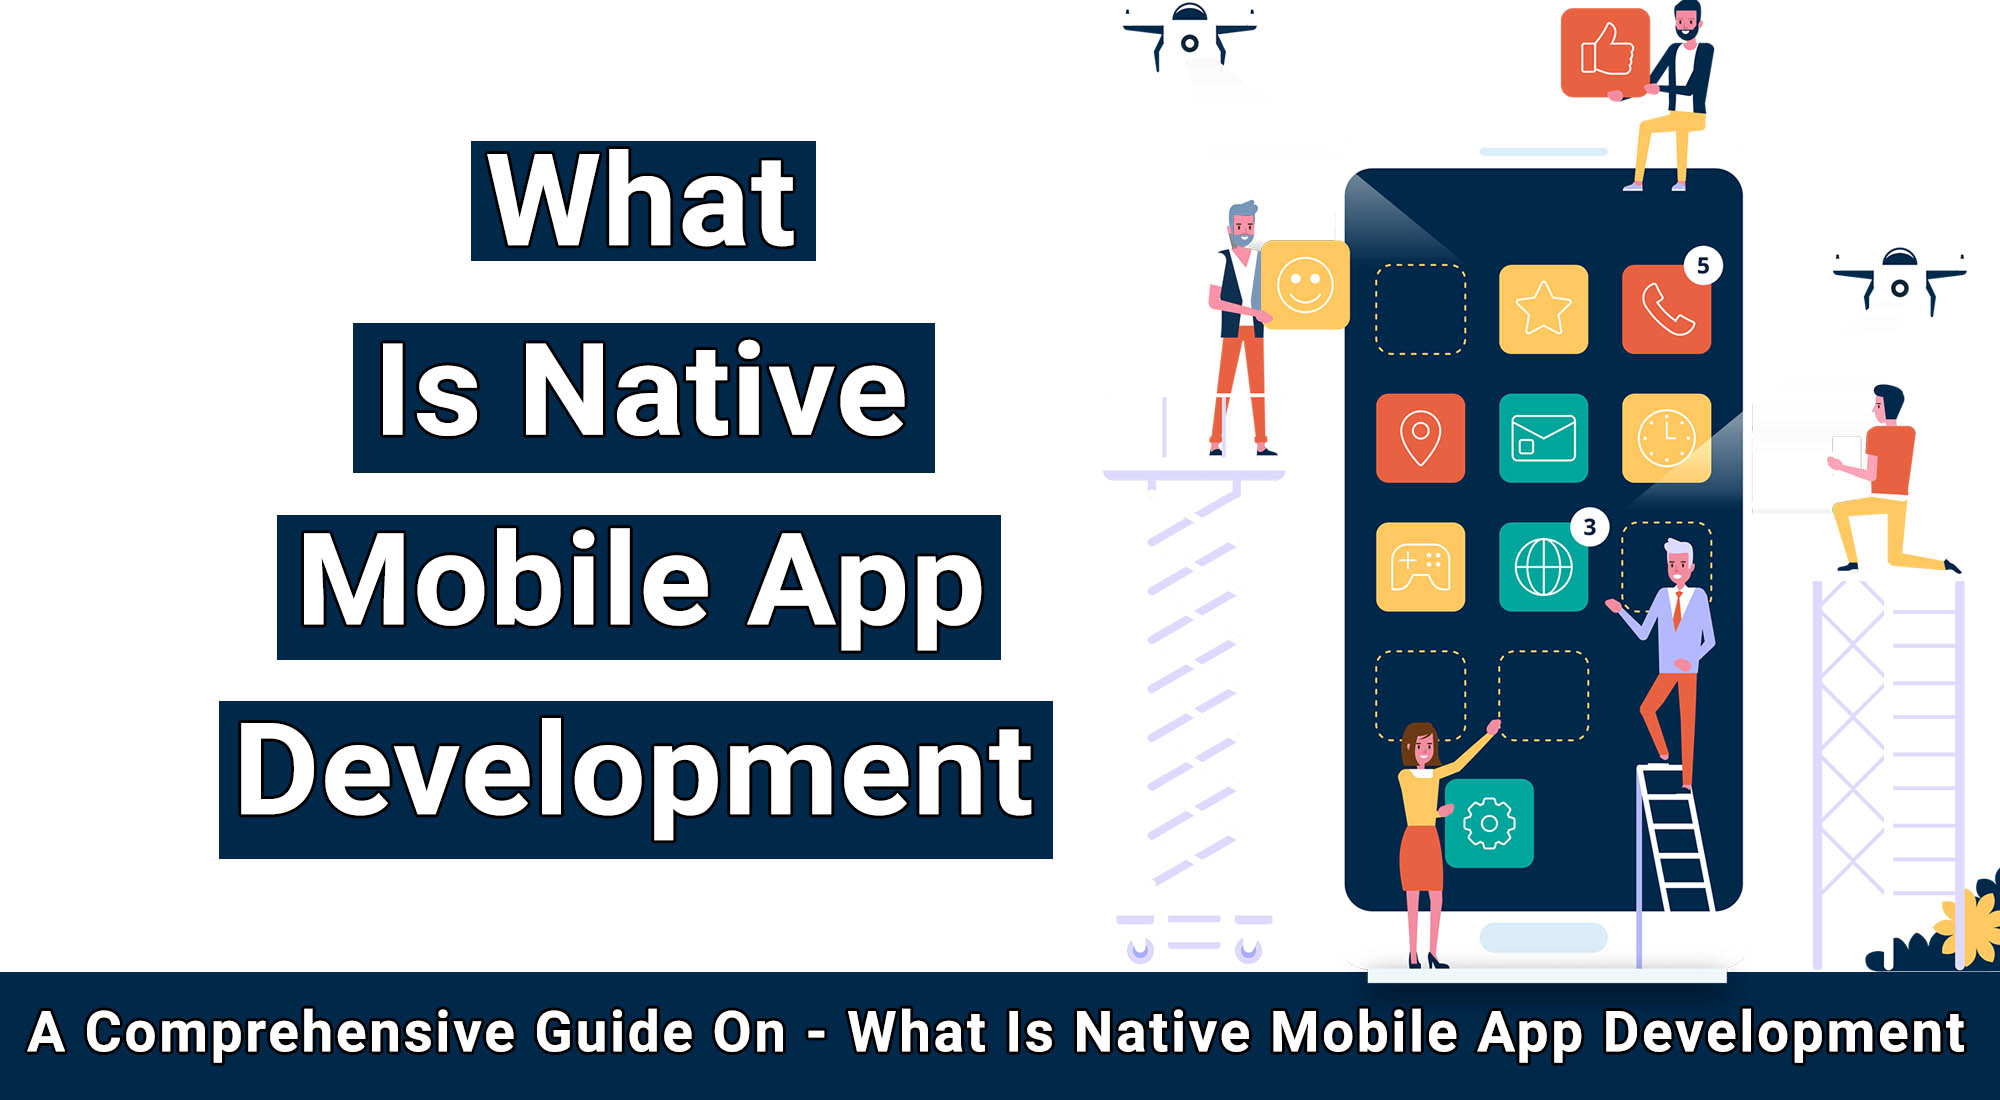 What is native mobile app development